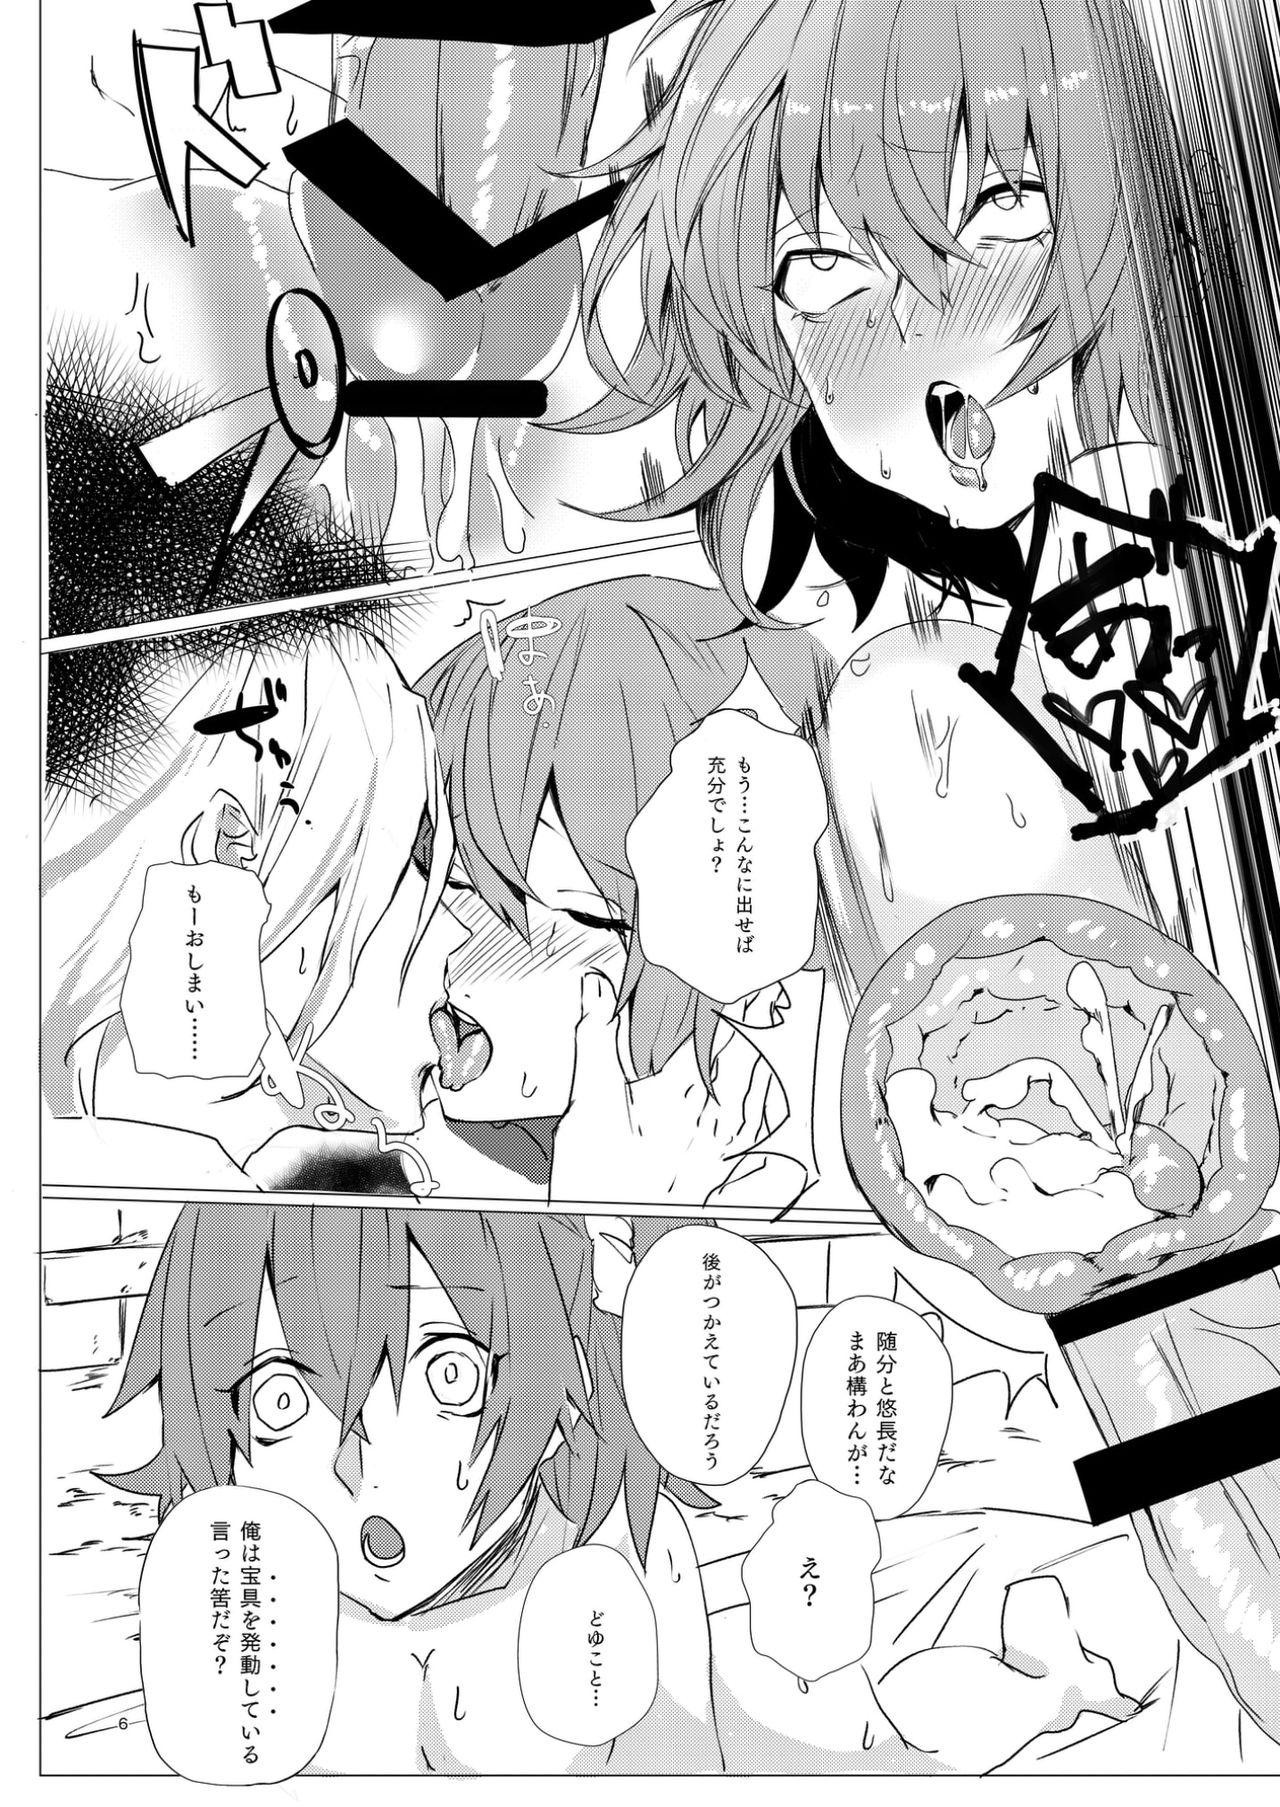 Lima ]one hundred monte cristo - Fate grand order Finger - Page 7